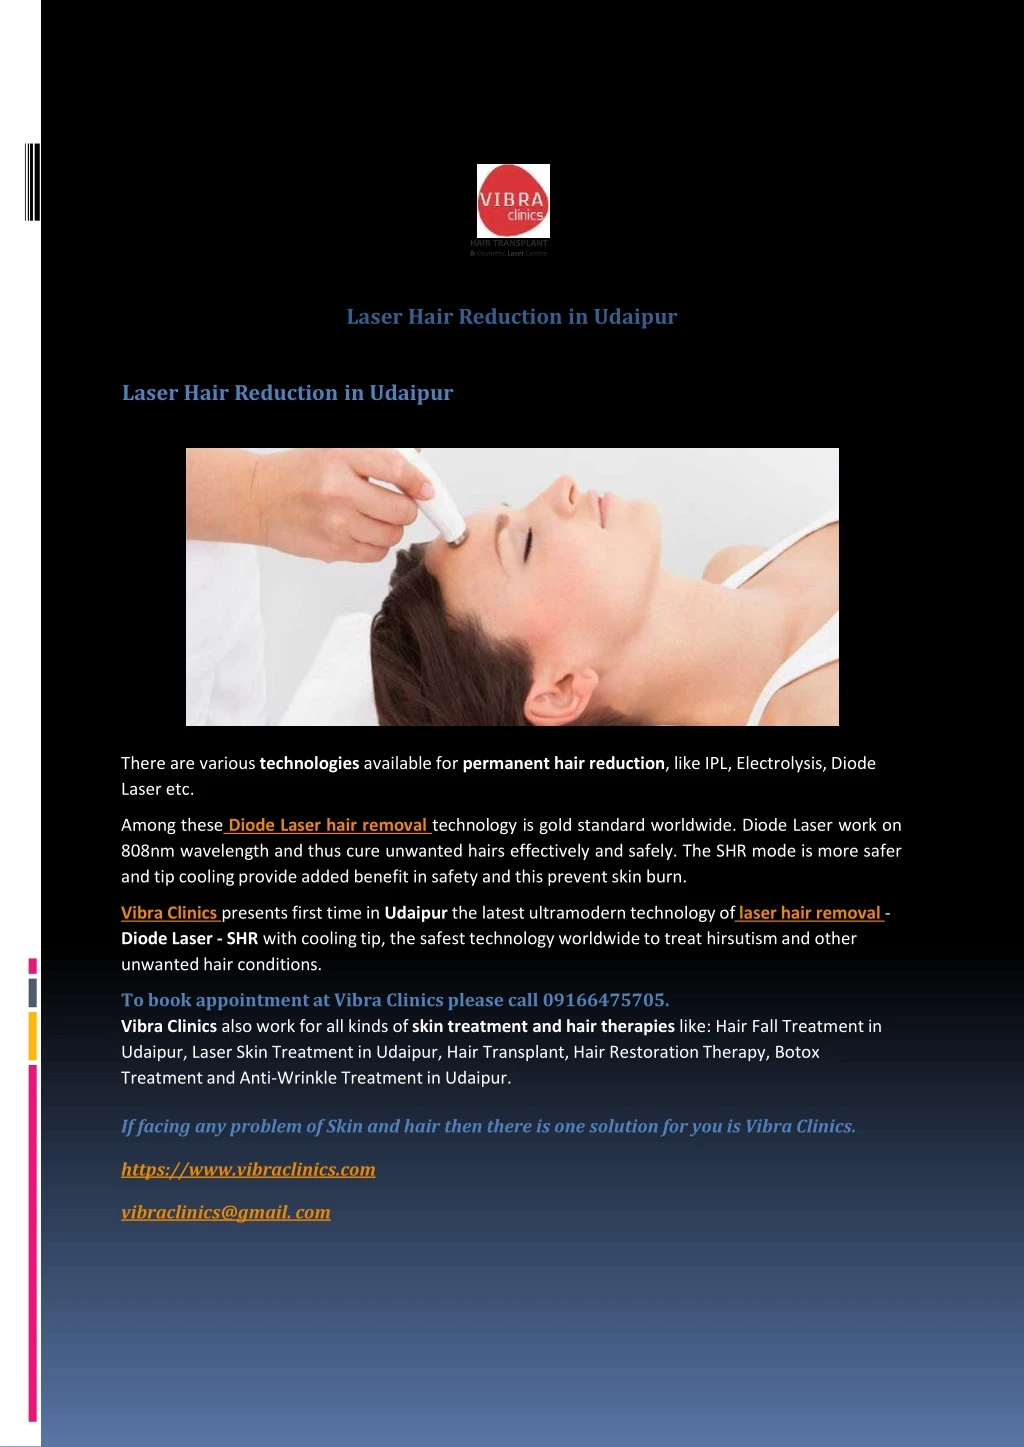 hair transplant cosmetic laser centre